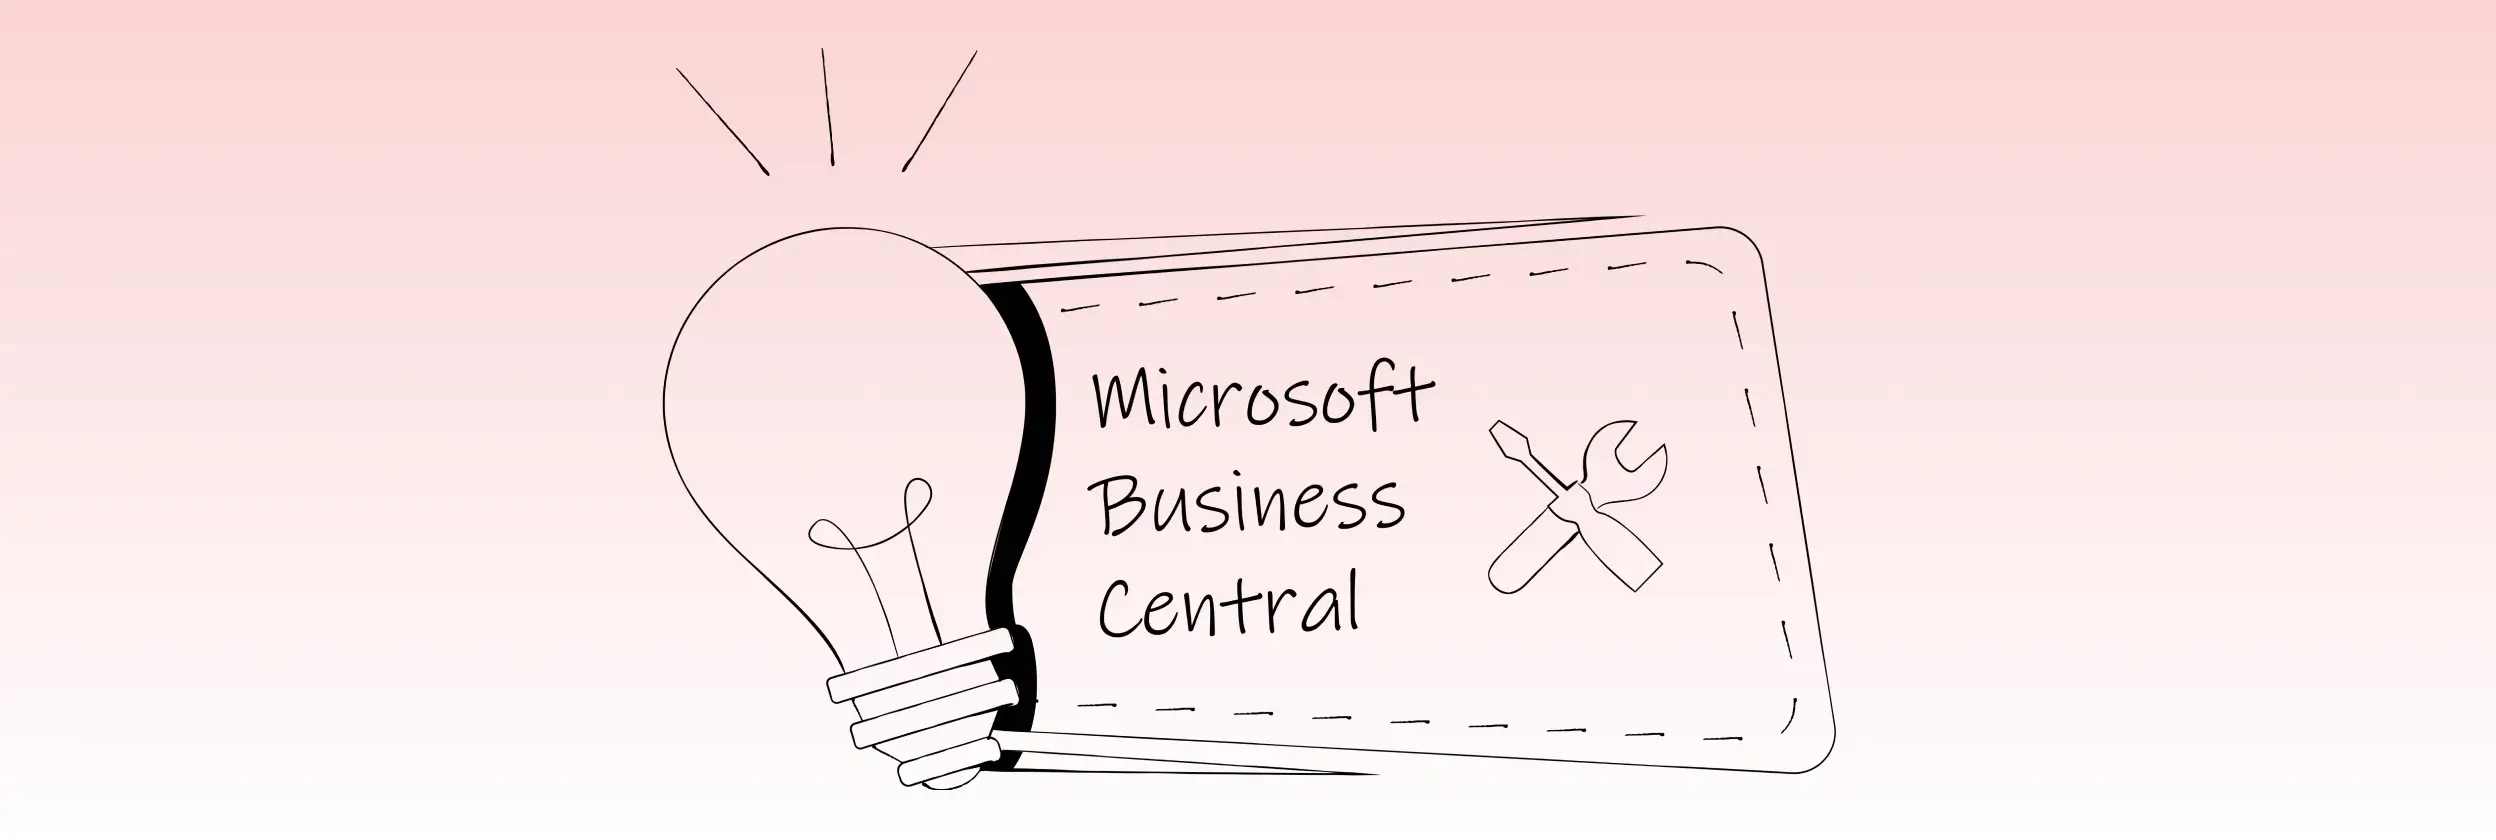 Top 5 Microsoft Business Central Tips and Tricks